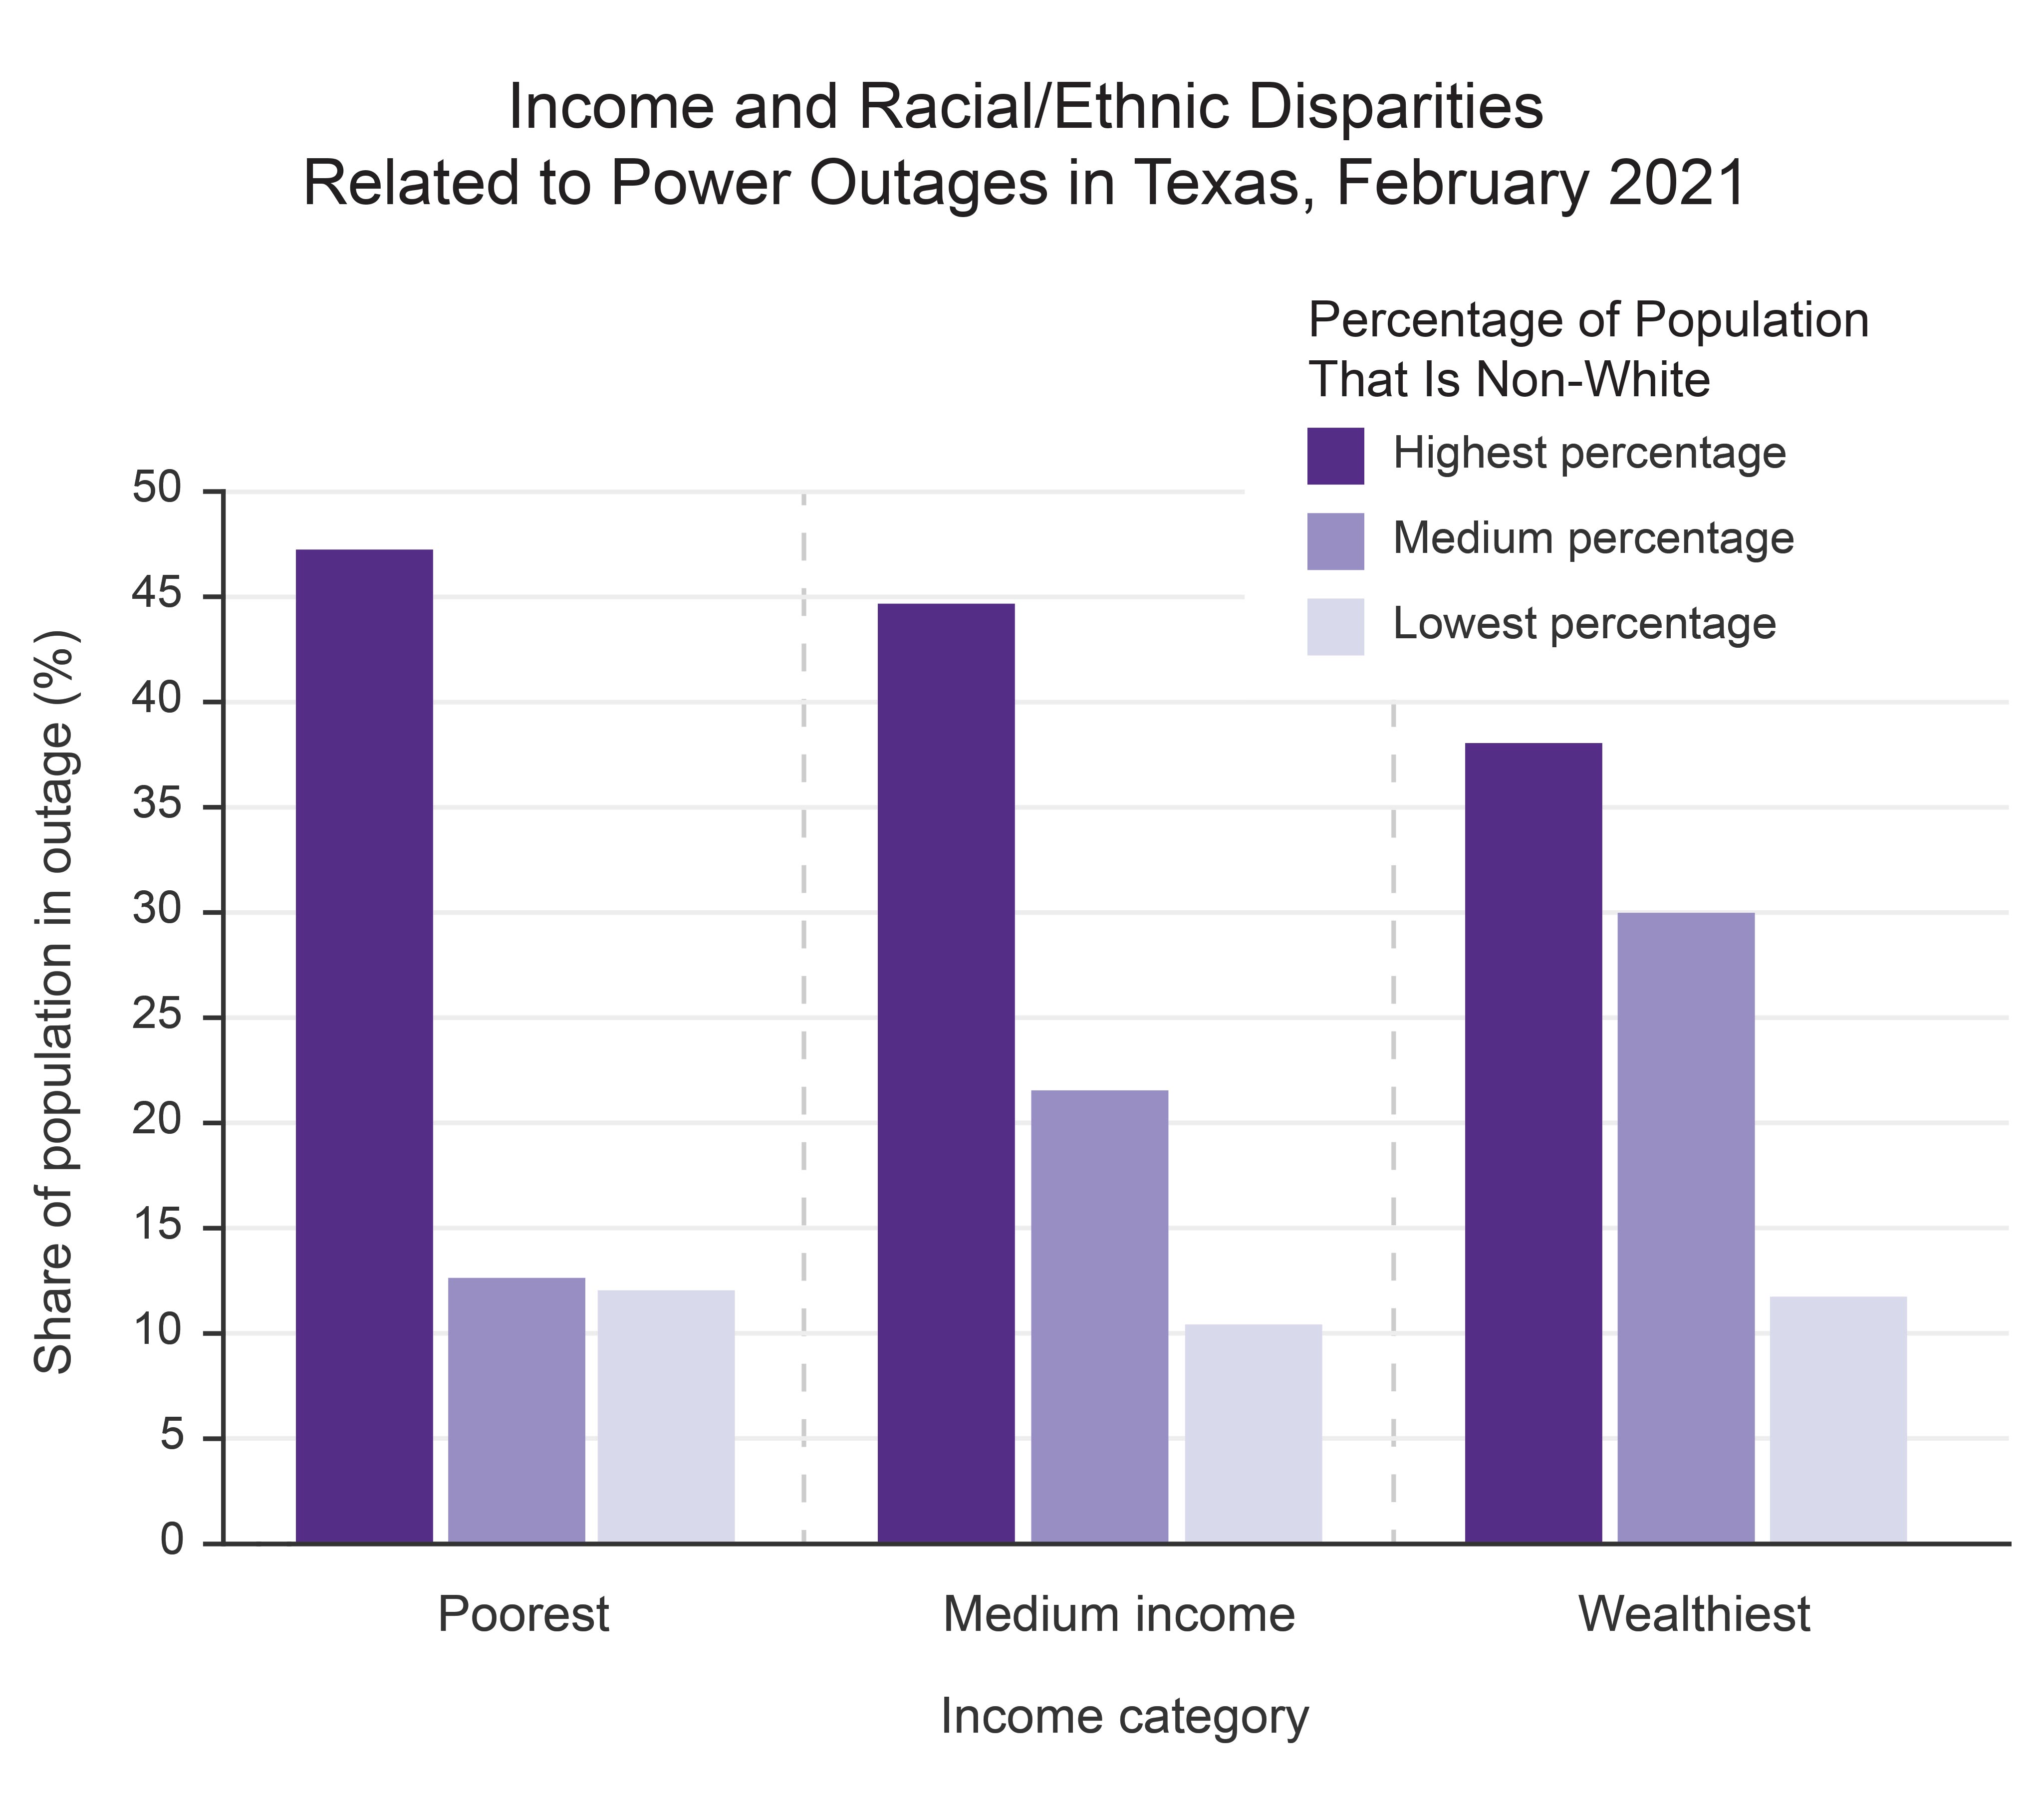 Income and Racial/Ethnic Disparities Related to Power Outages in Texas, February 2021